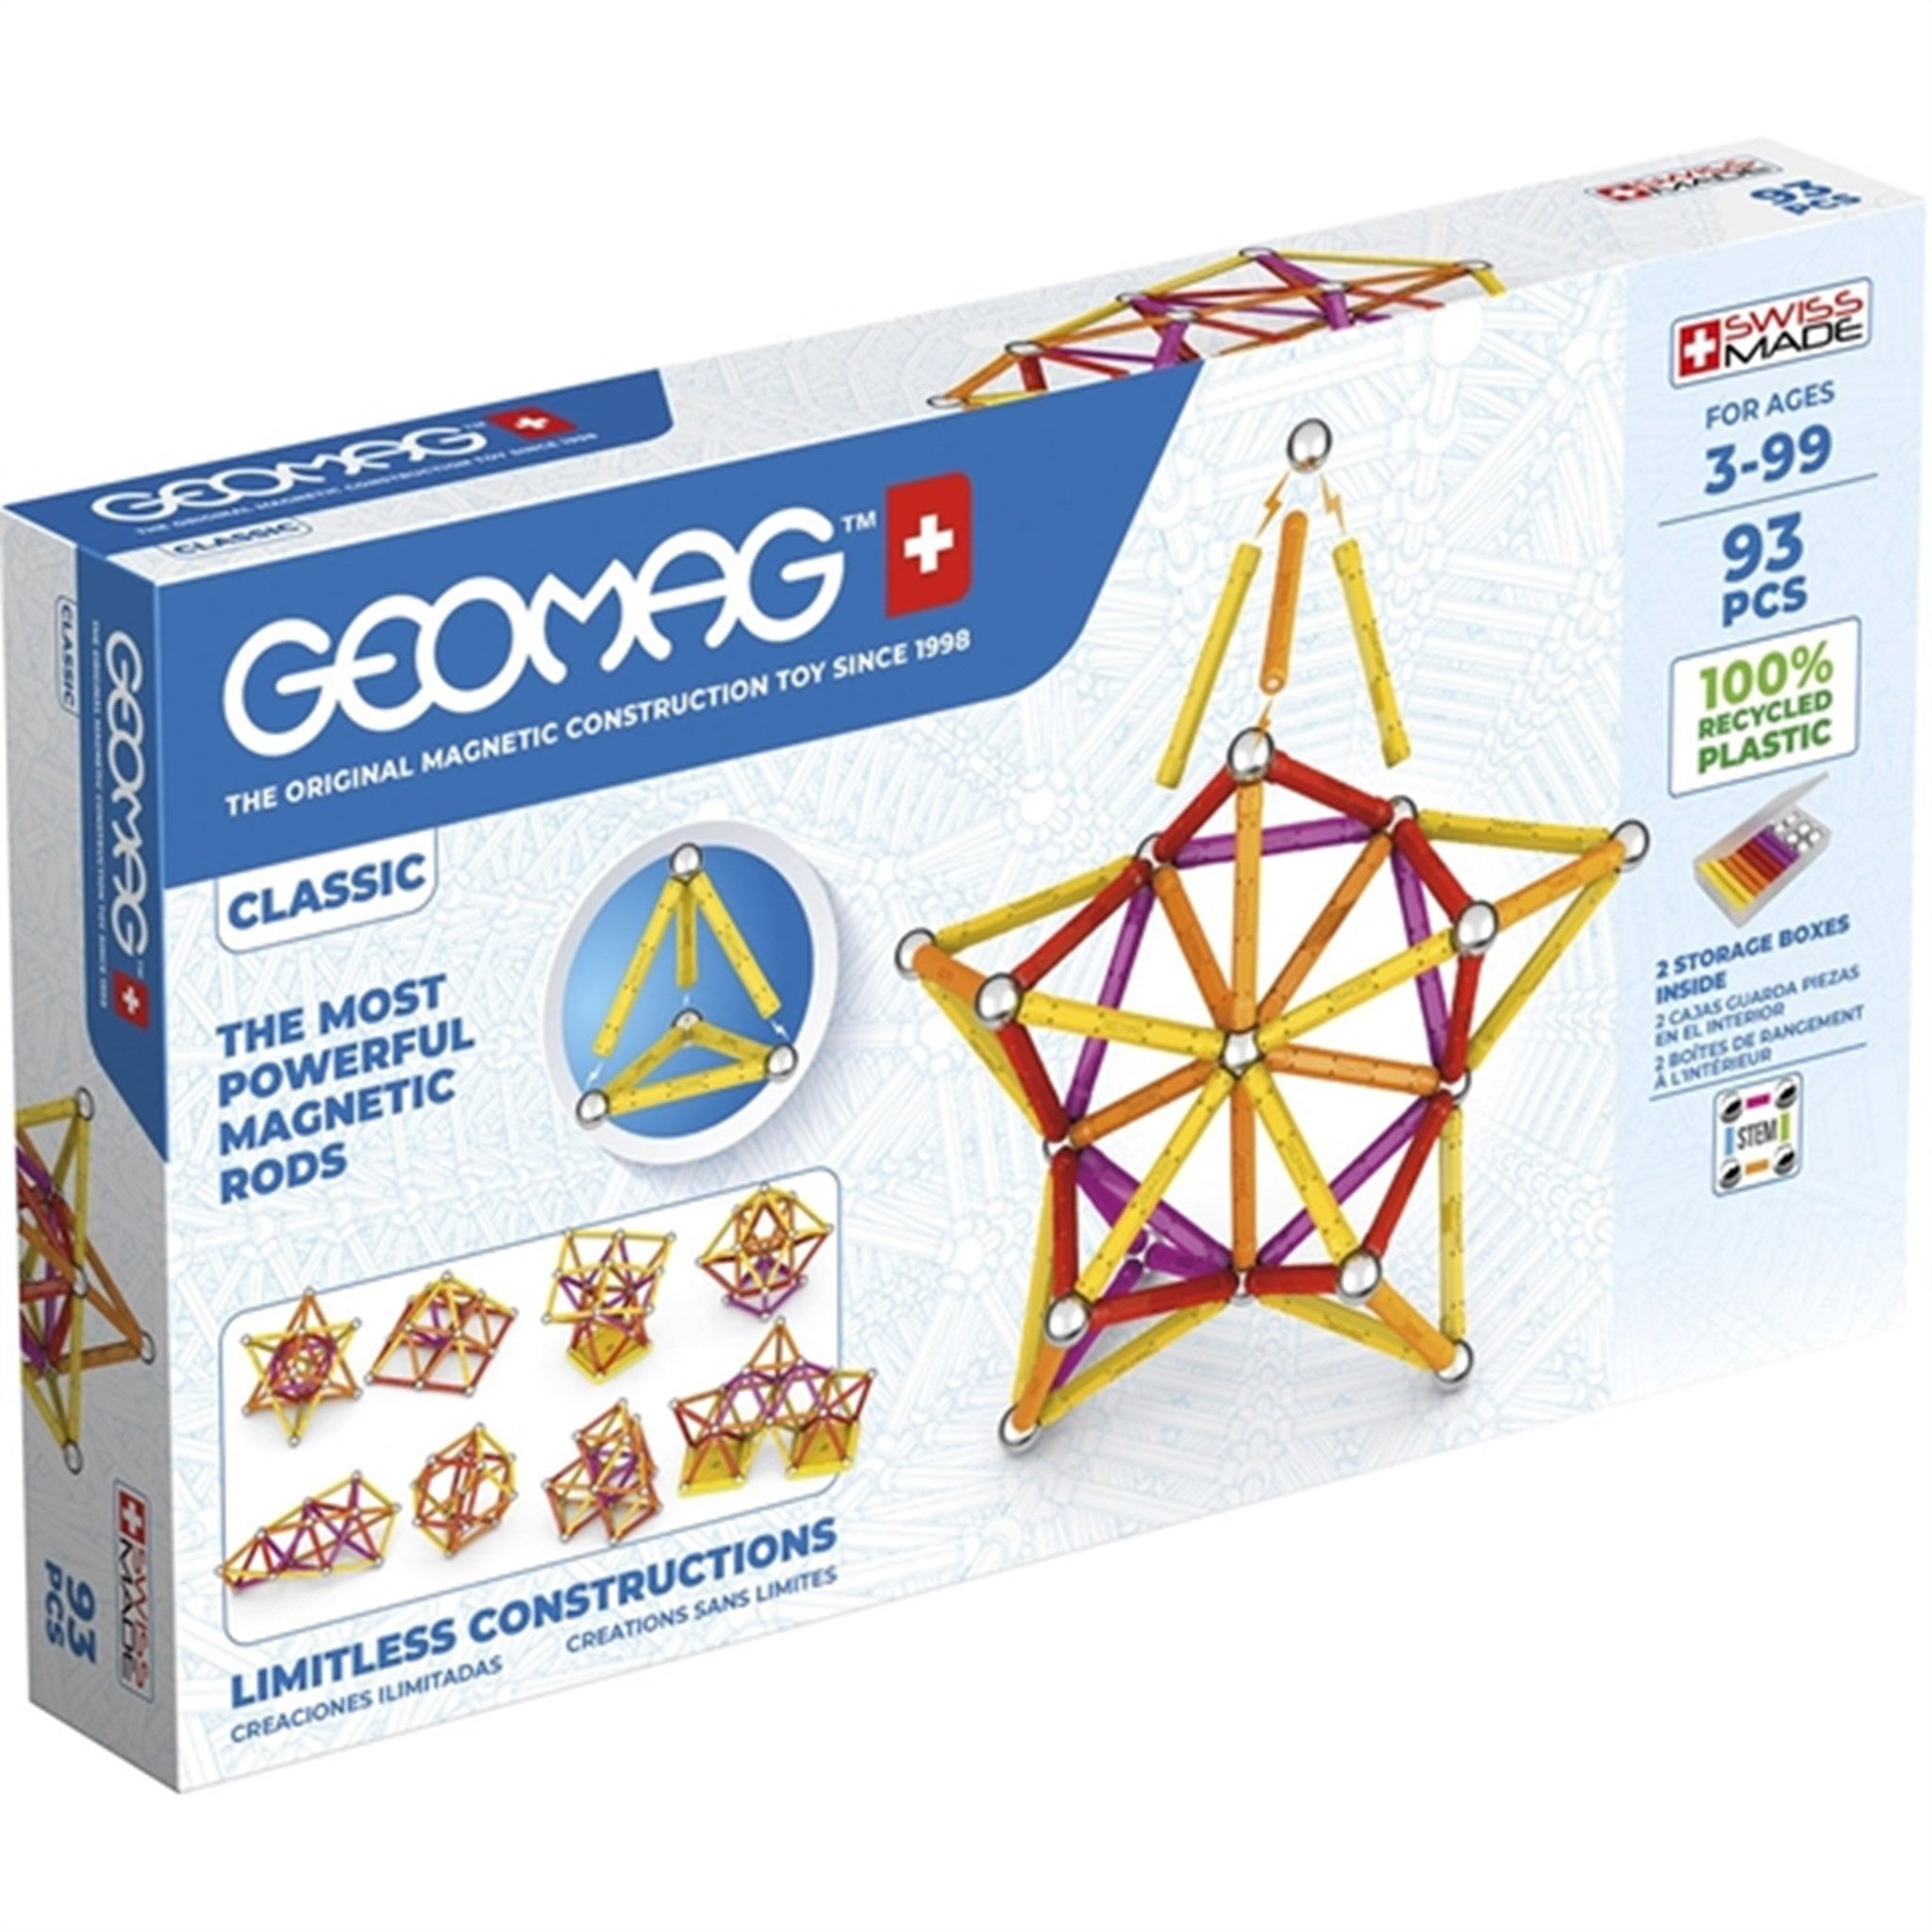 Geomag Classic Recycled 93 stk